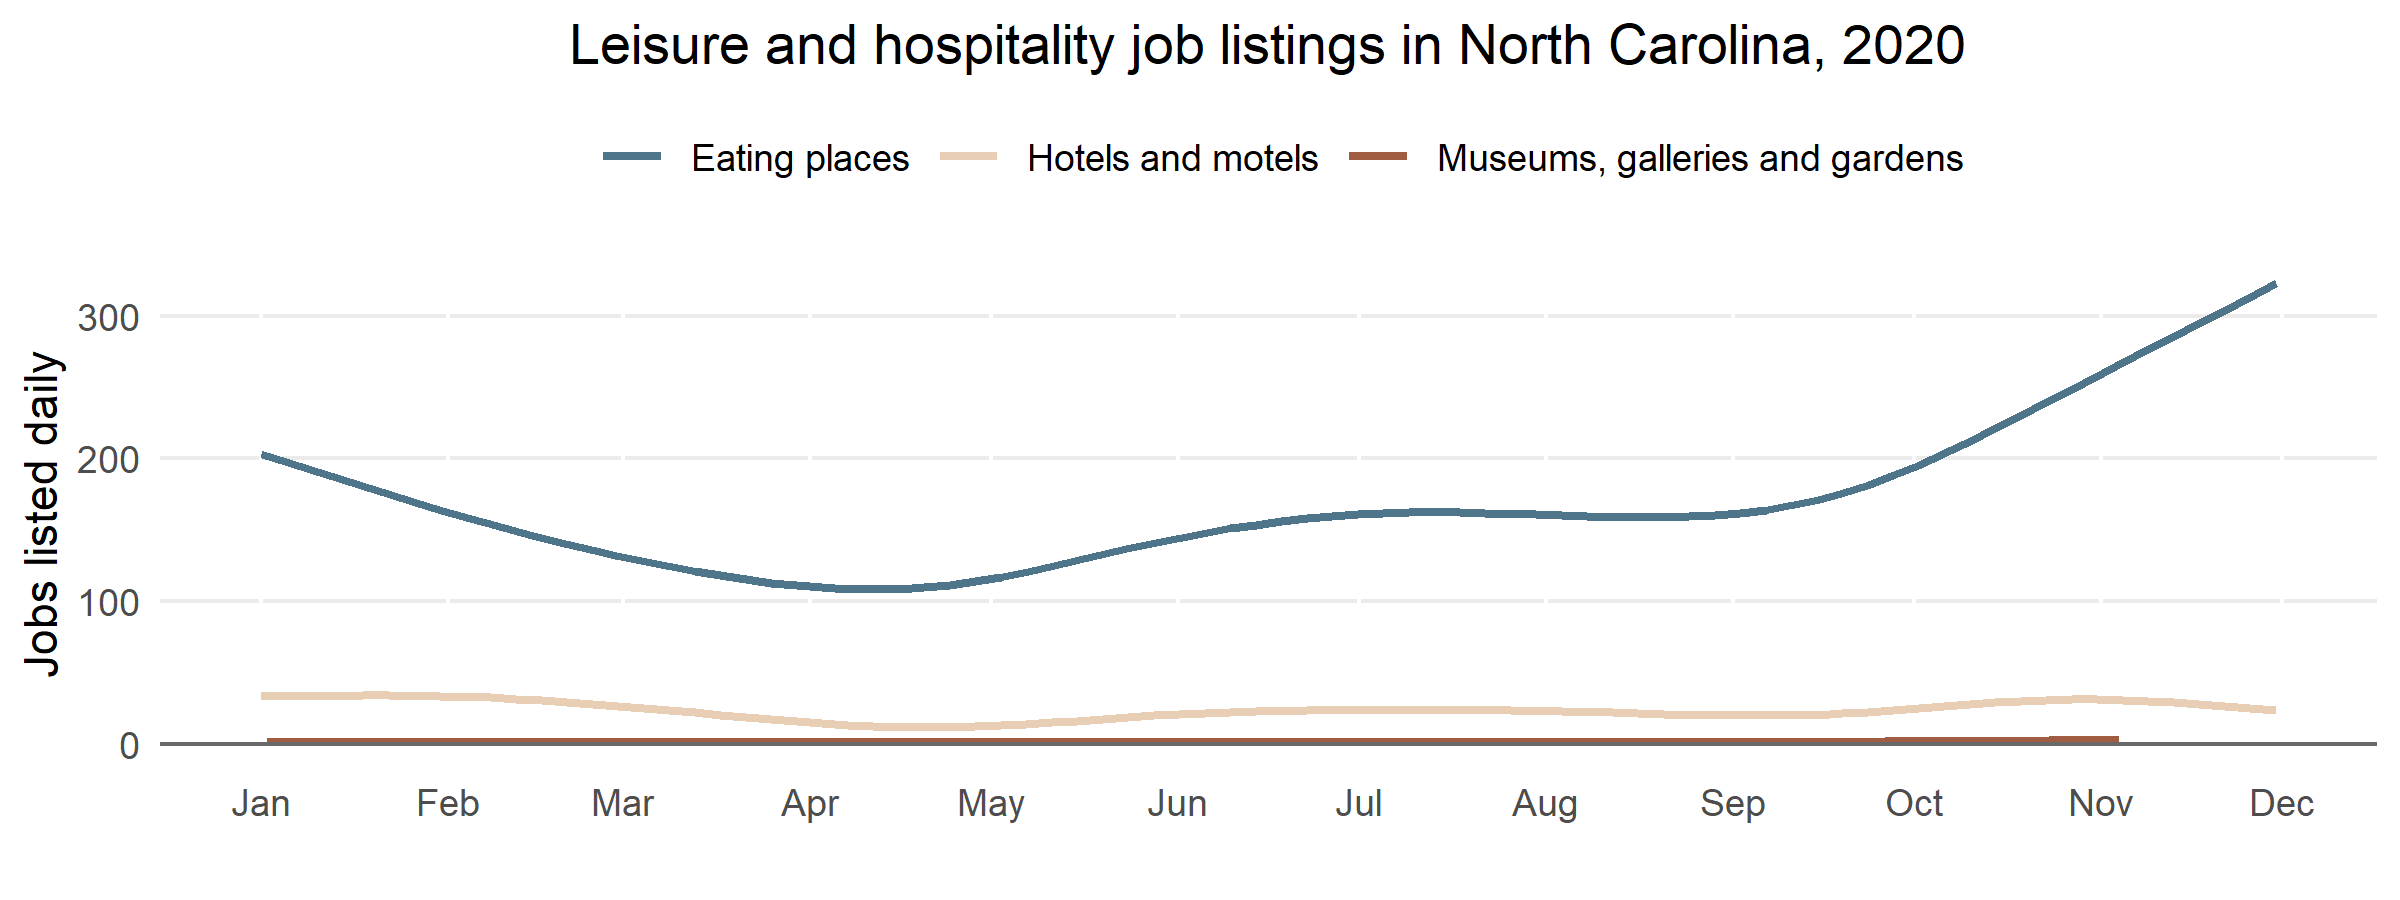 A line chart titled “Job listings in leisure and hospitality.” It has three lines, one representing eating places, another representing hotels and motels, and another representing museums, galleries, and gardens. The y-axis represents total daily job listings from 0 through 300. The x-axis represents the date, running from January 2020 to October 2020. Eating places declined early on, but began a steep rise in October.  Hotels and motels saw a modest dip in April 2020, but recovered.  Museums, galleries and gardens remained stable